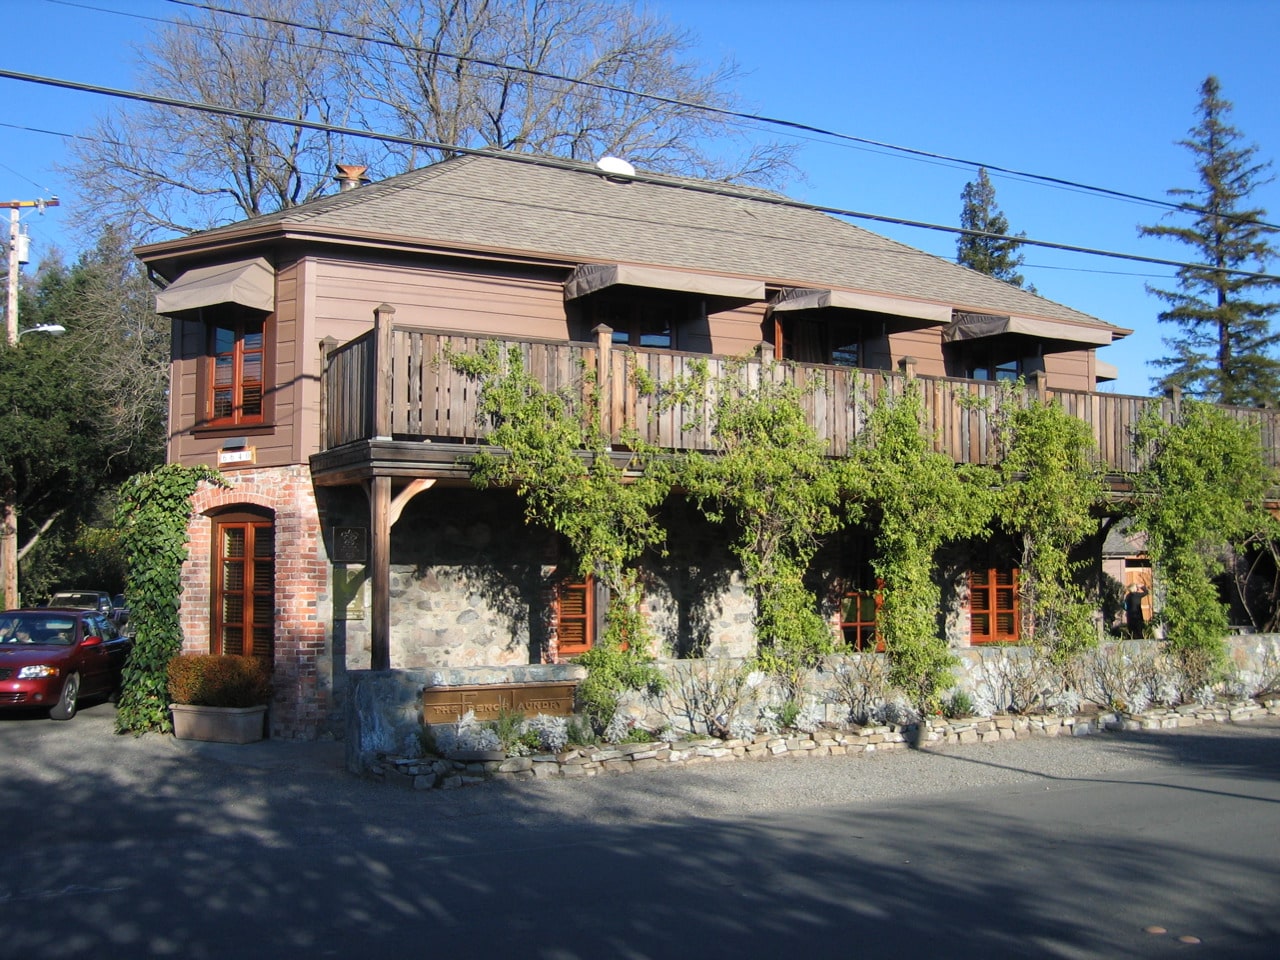 The outside view of the French Laundry, including stonework, siding, and a balcony with green vines growing along it.